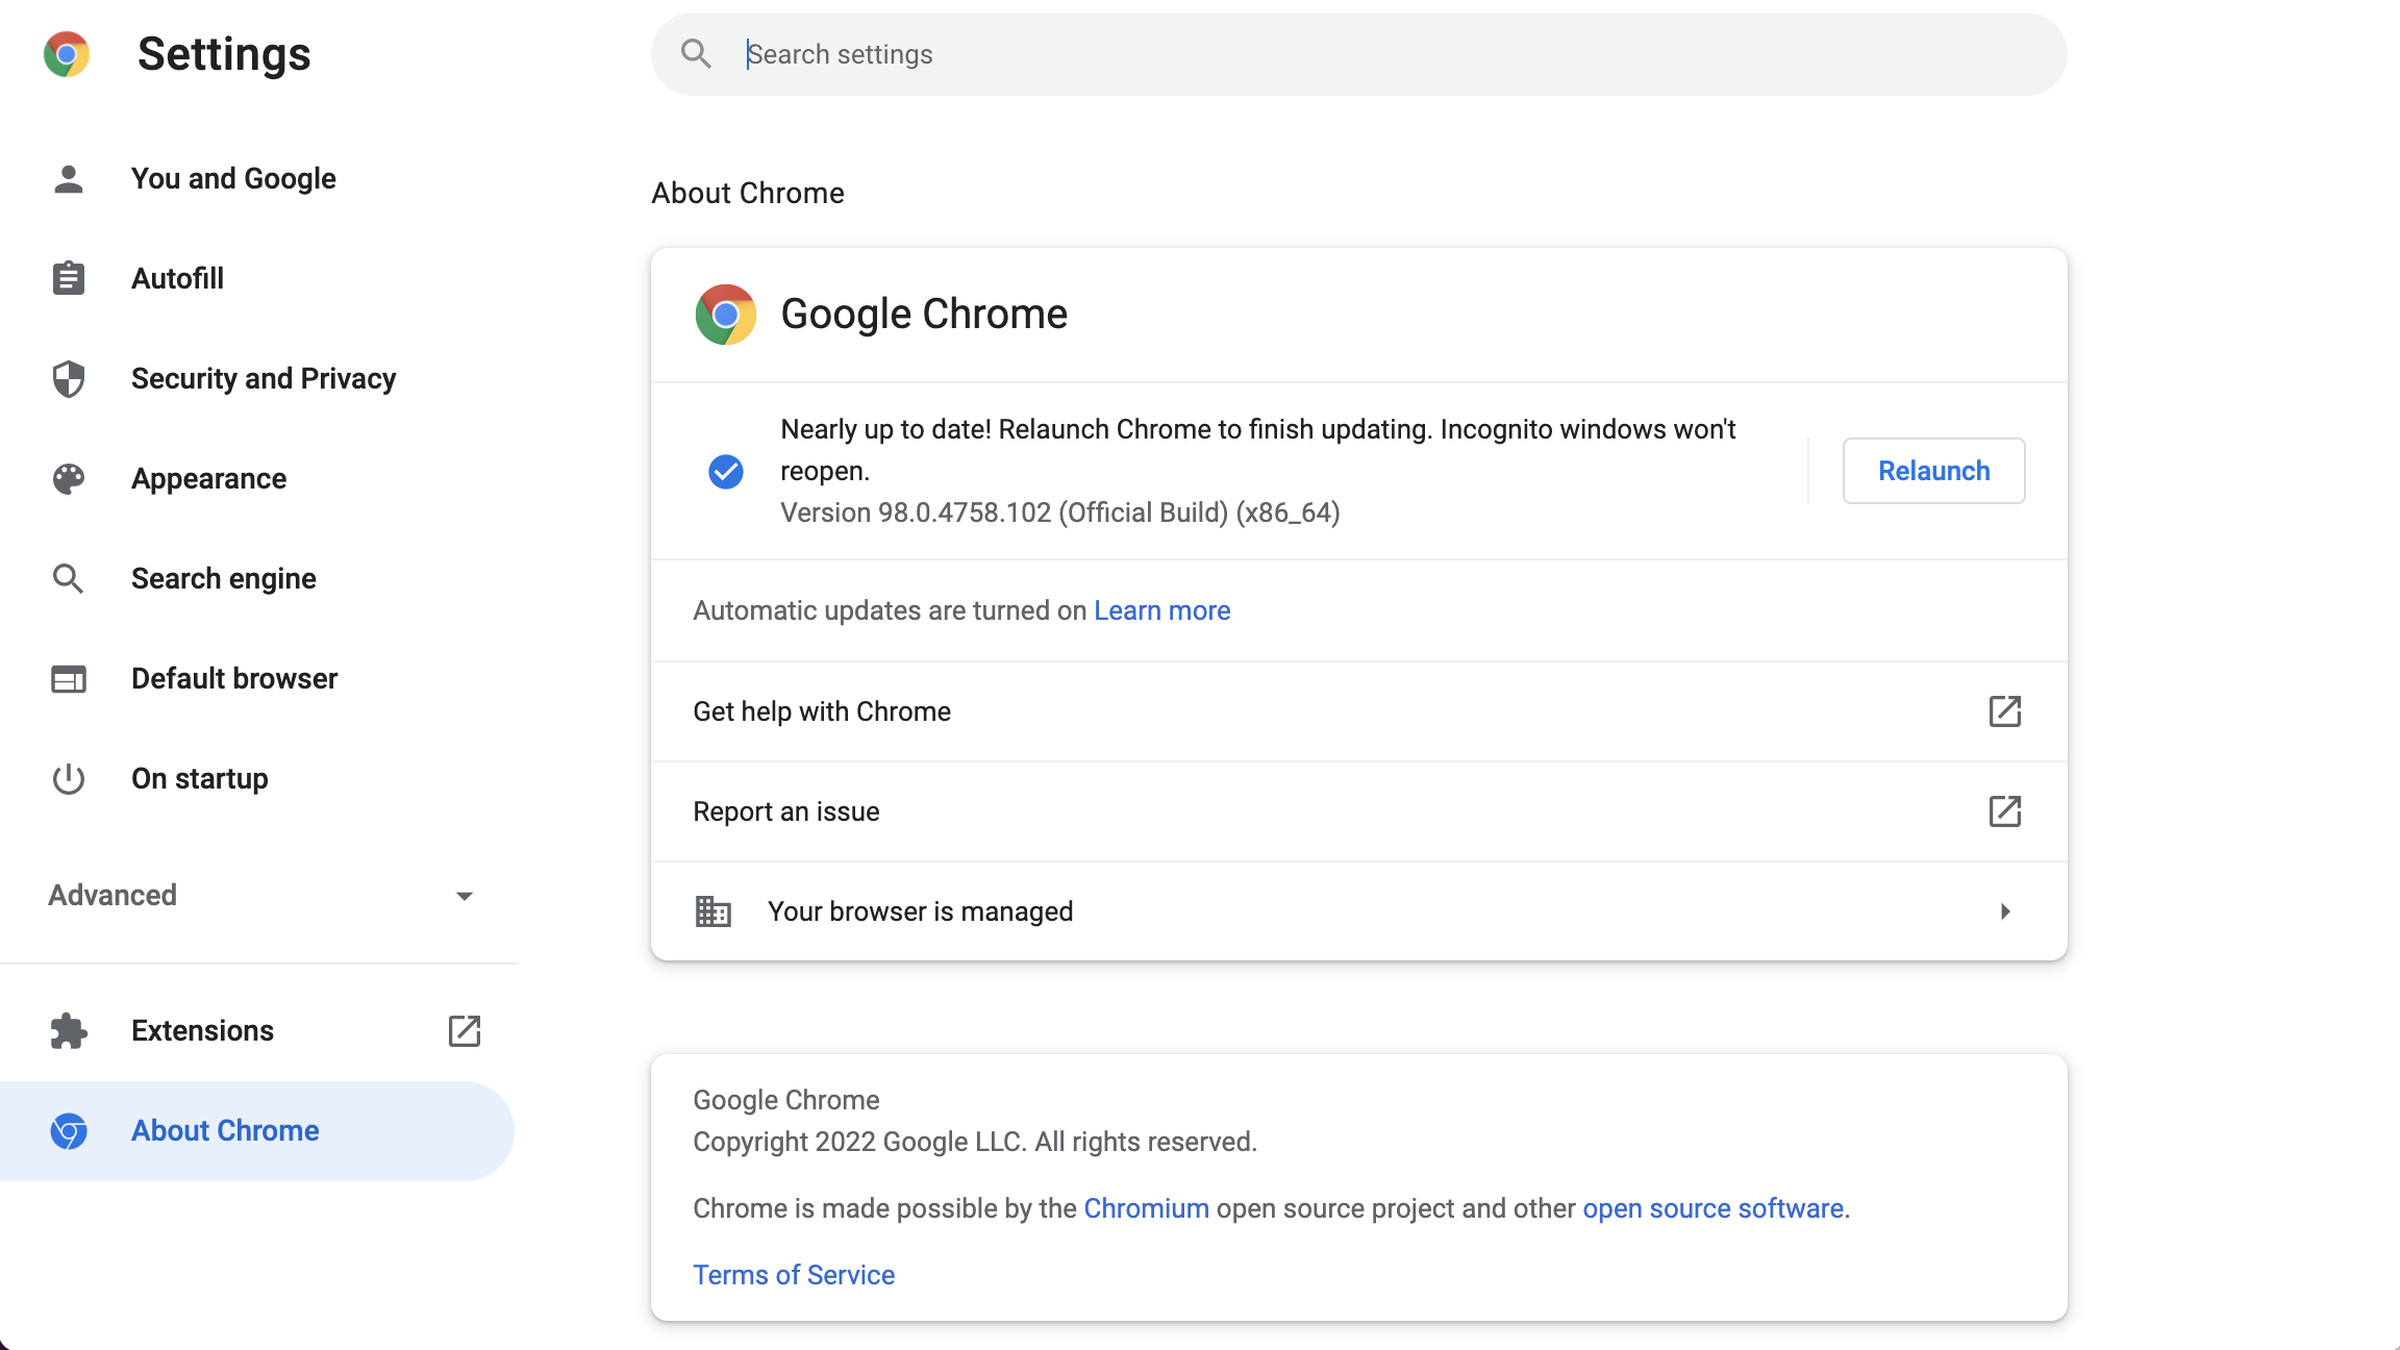 If you need to relaunch in order to update Chrome, there will be a Relaunch button.